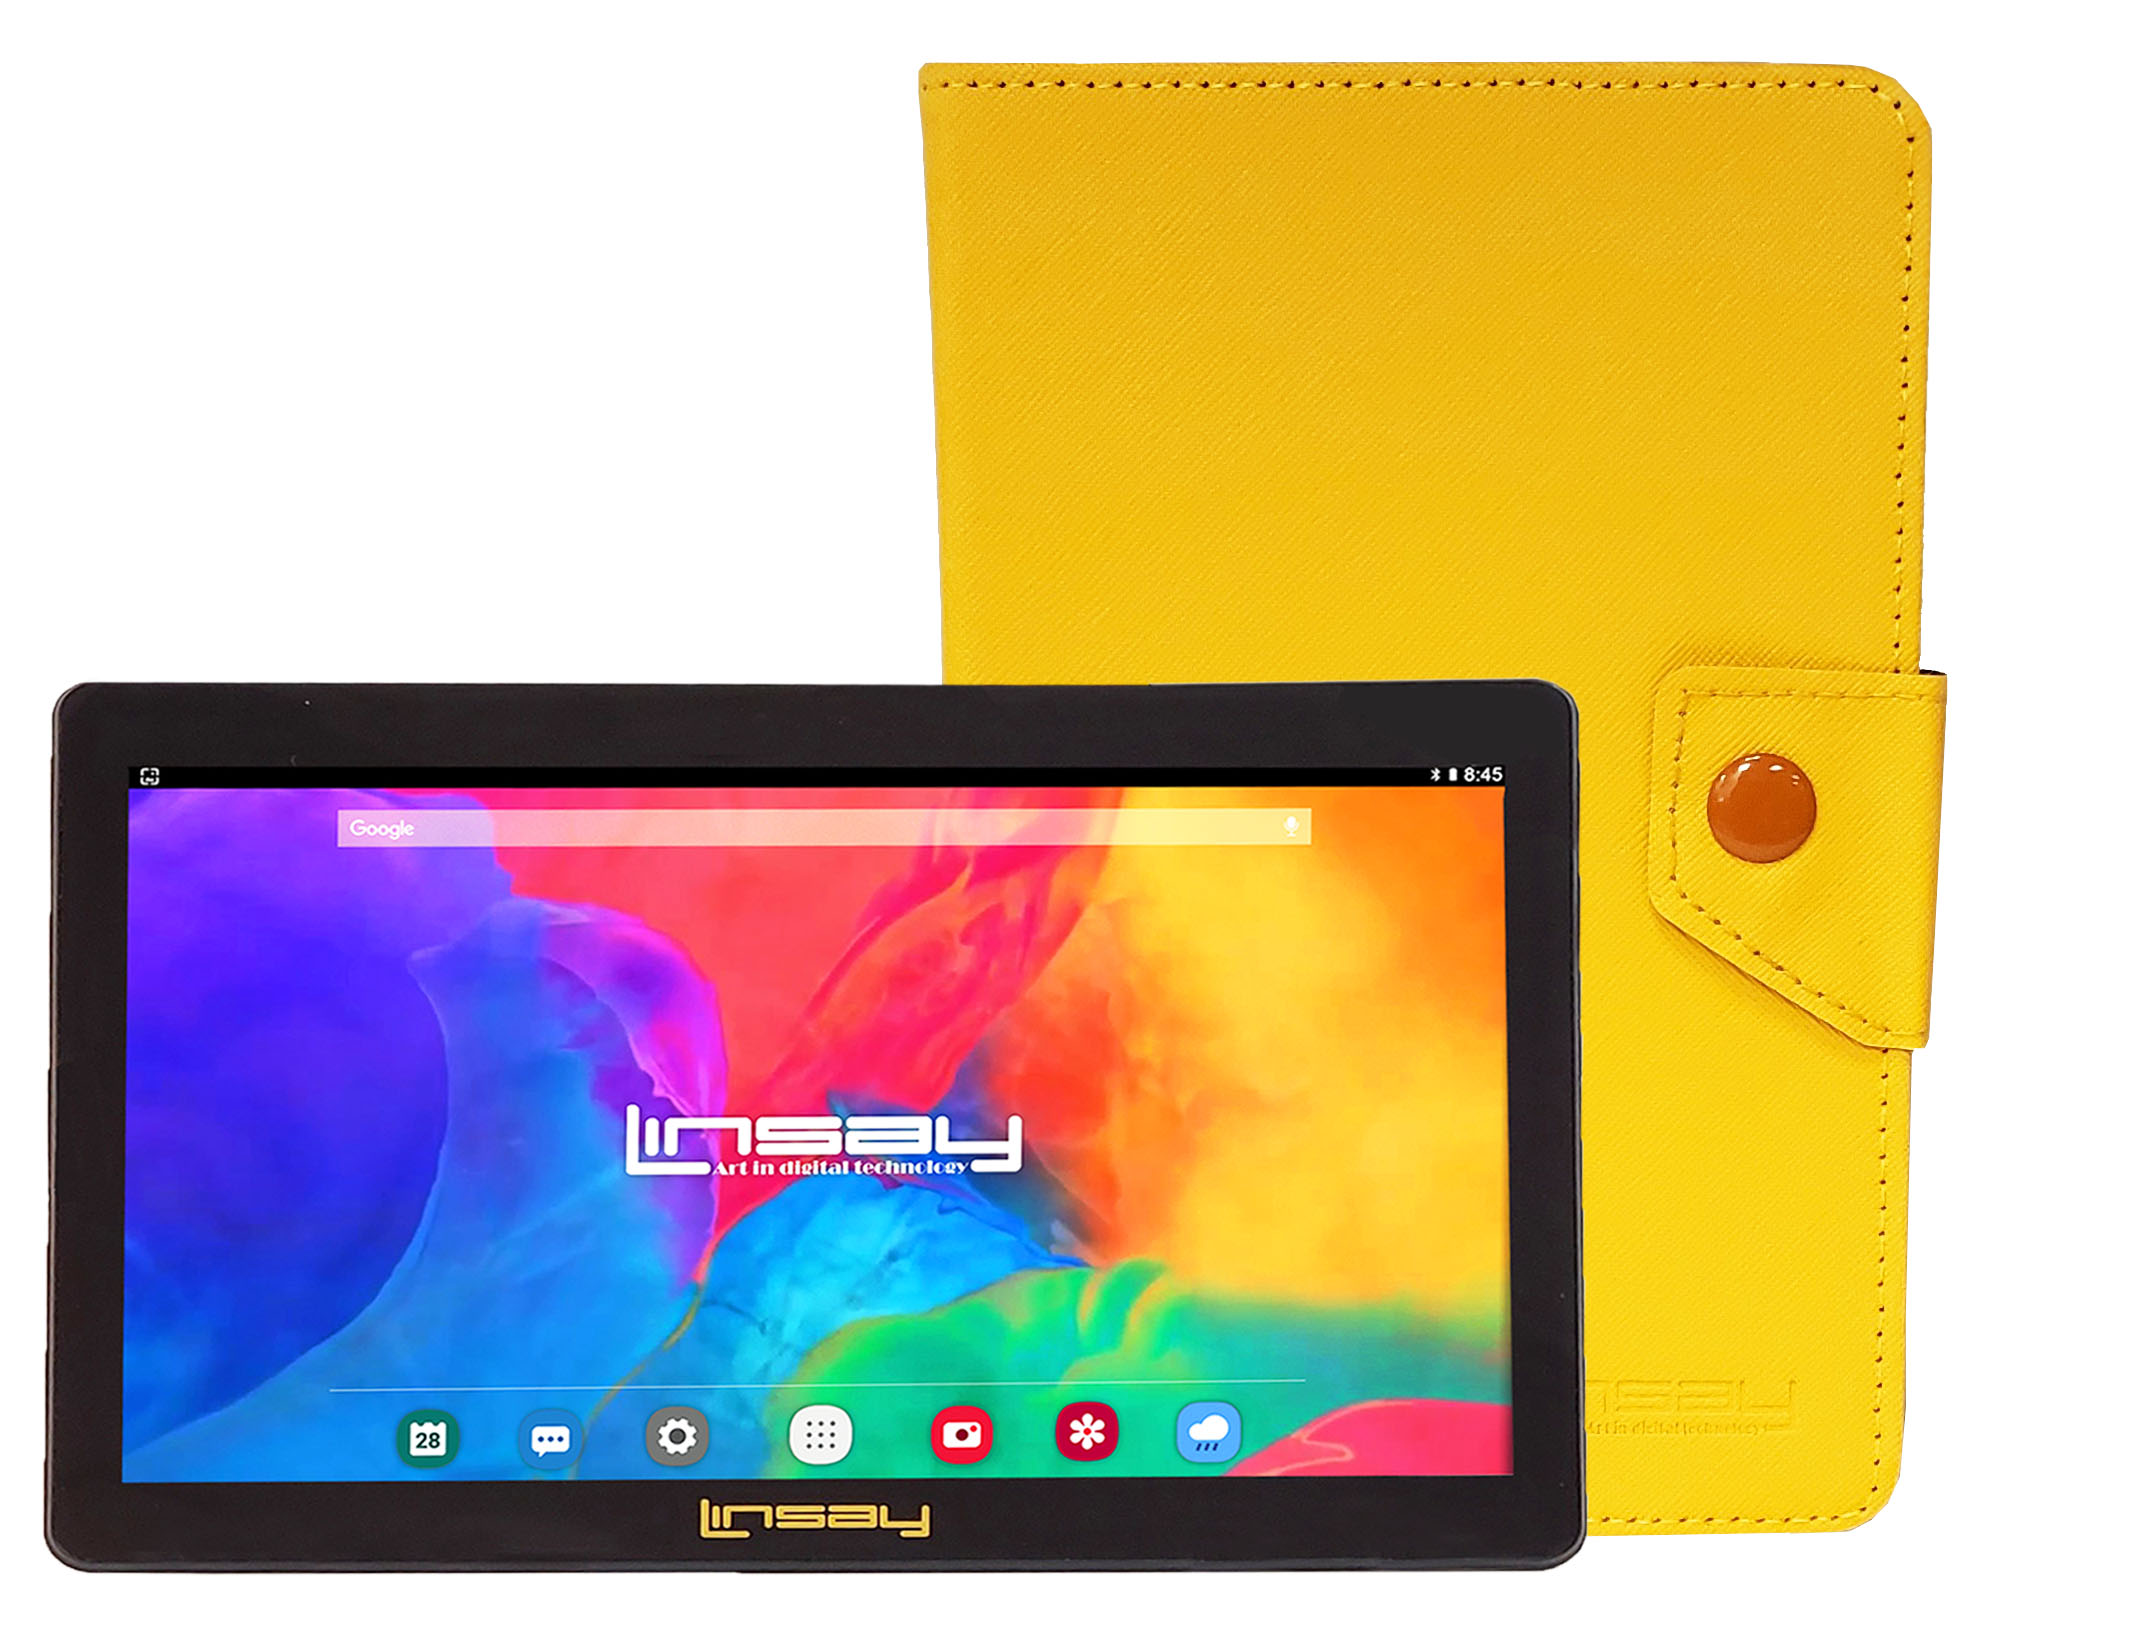 LINSAY 7" Quad Core 2GB RAM 32GB Storage Android 12 WiFi Tablet with case Yellow Leather Case - image 1 of 3